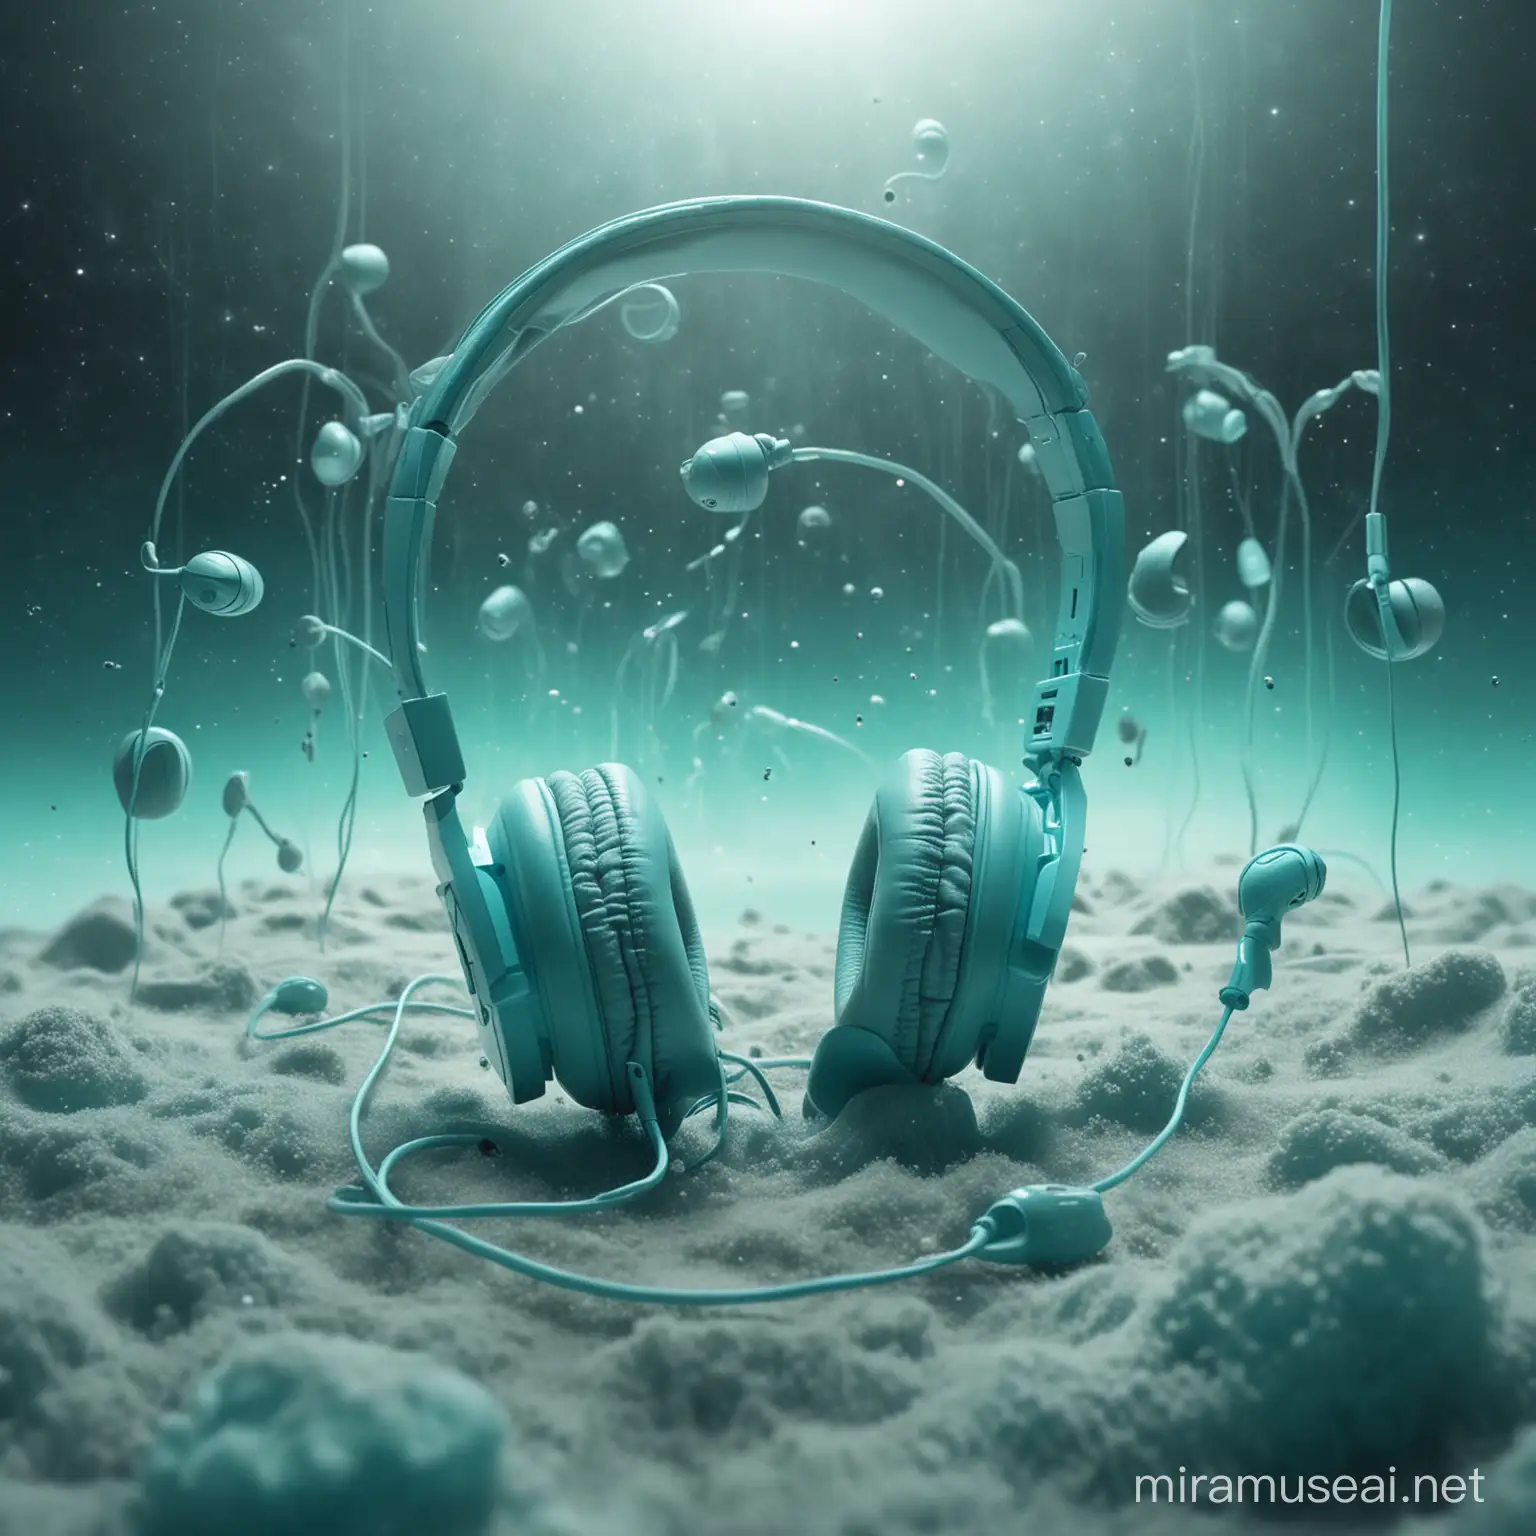 A surreal composition featuring cyan-colored headphones floating in a dreamlike space, with abstract elements representing the concept of communication and understanding.